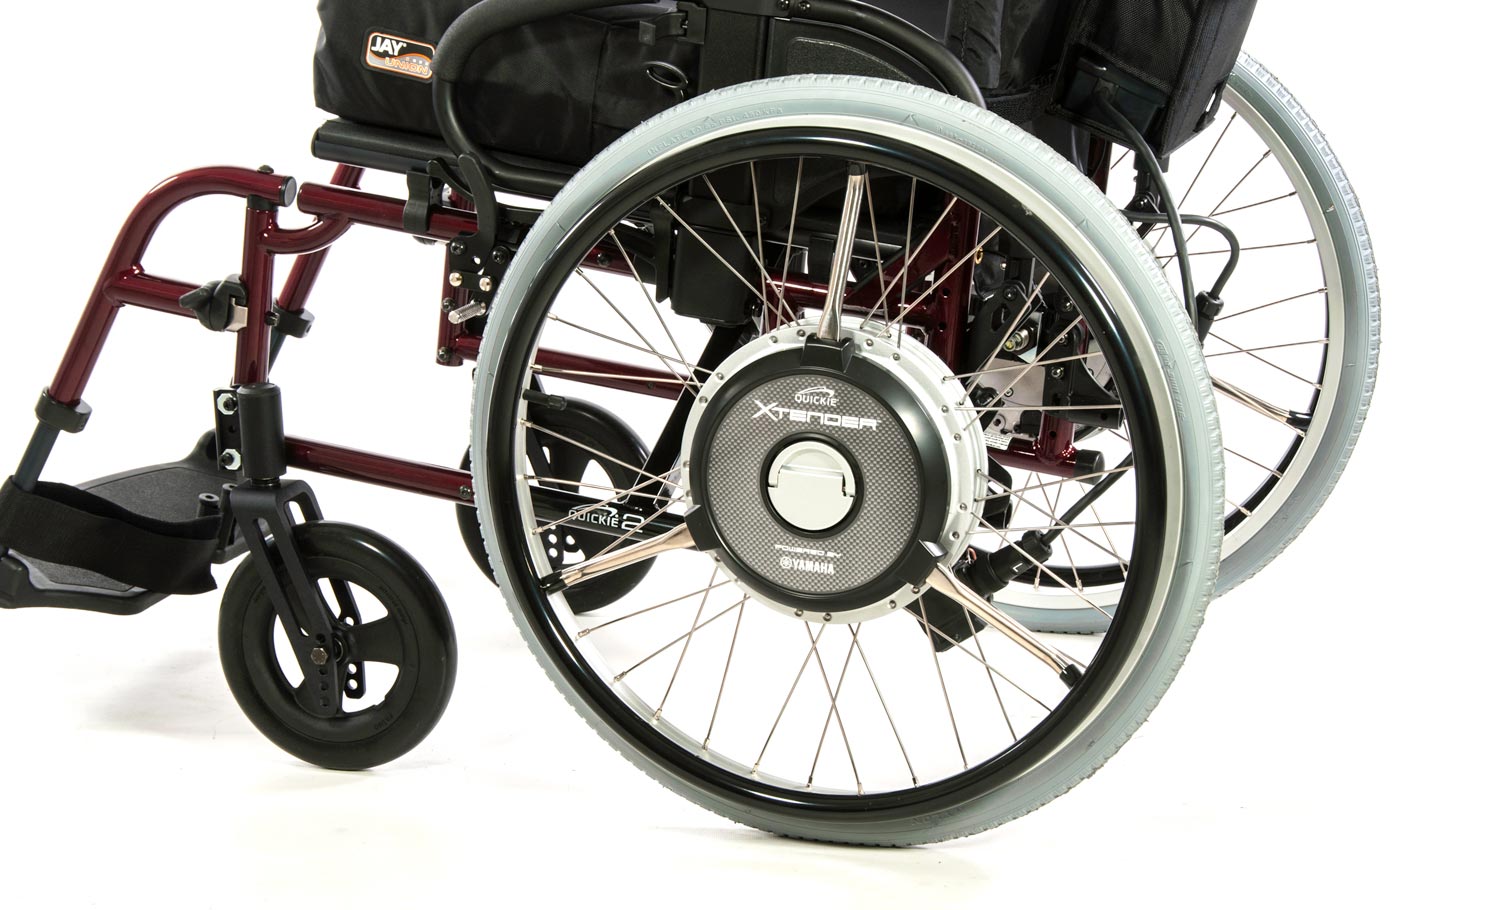 Manual & Electric Wheelchair Accessories